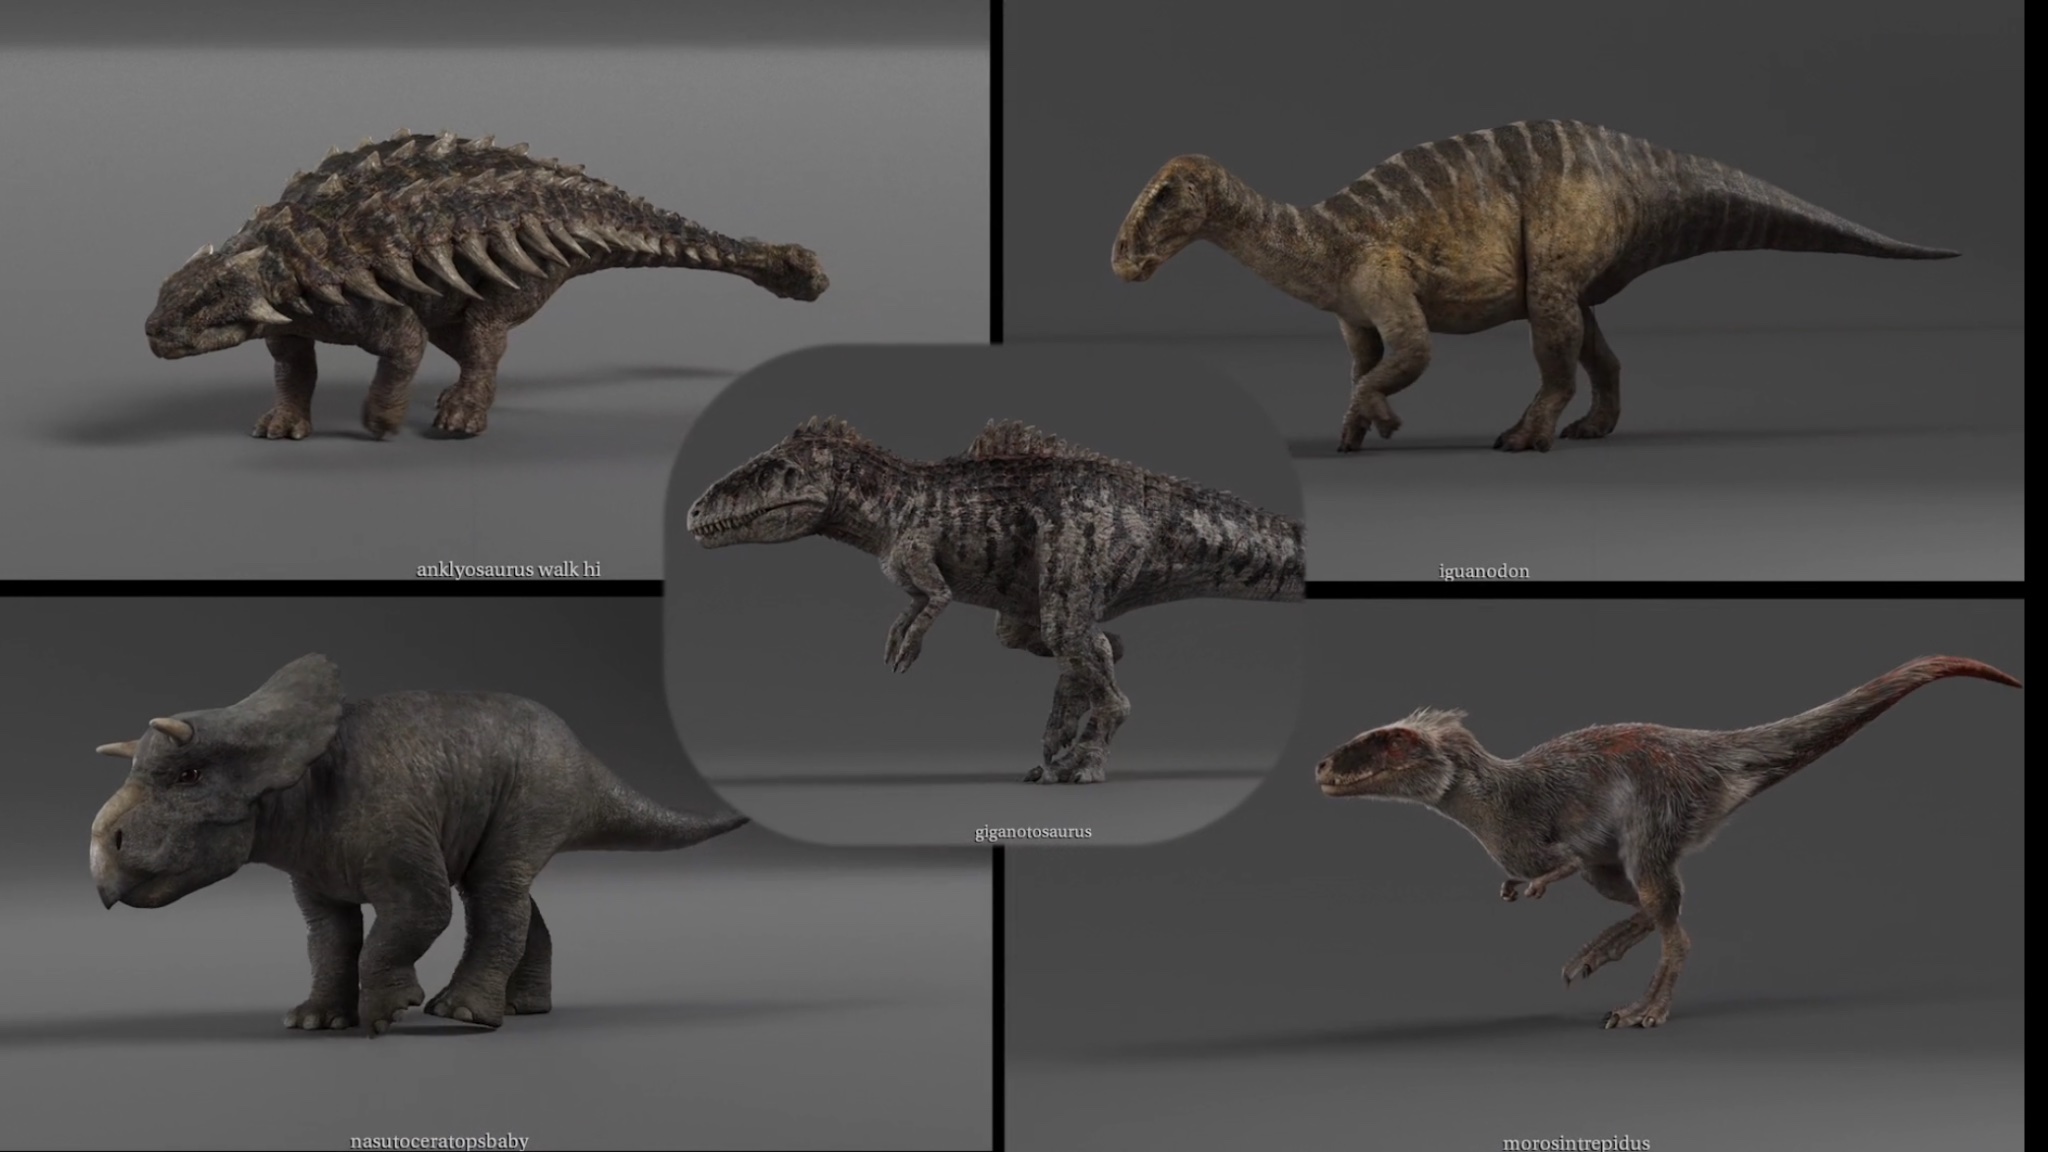 Between these Gigantosaurus models across all media, which of